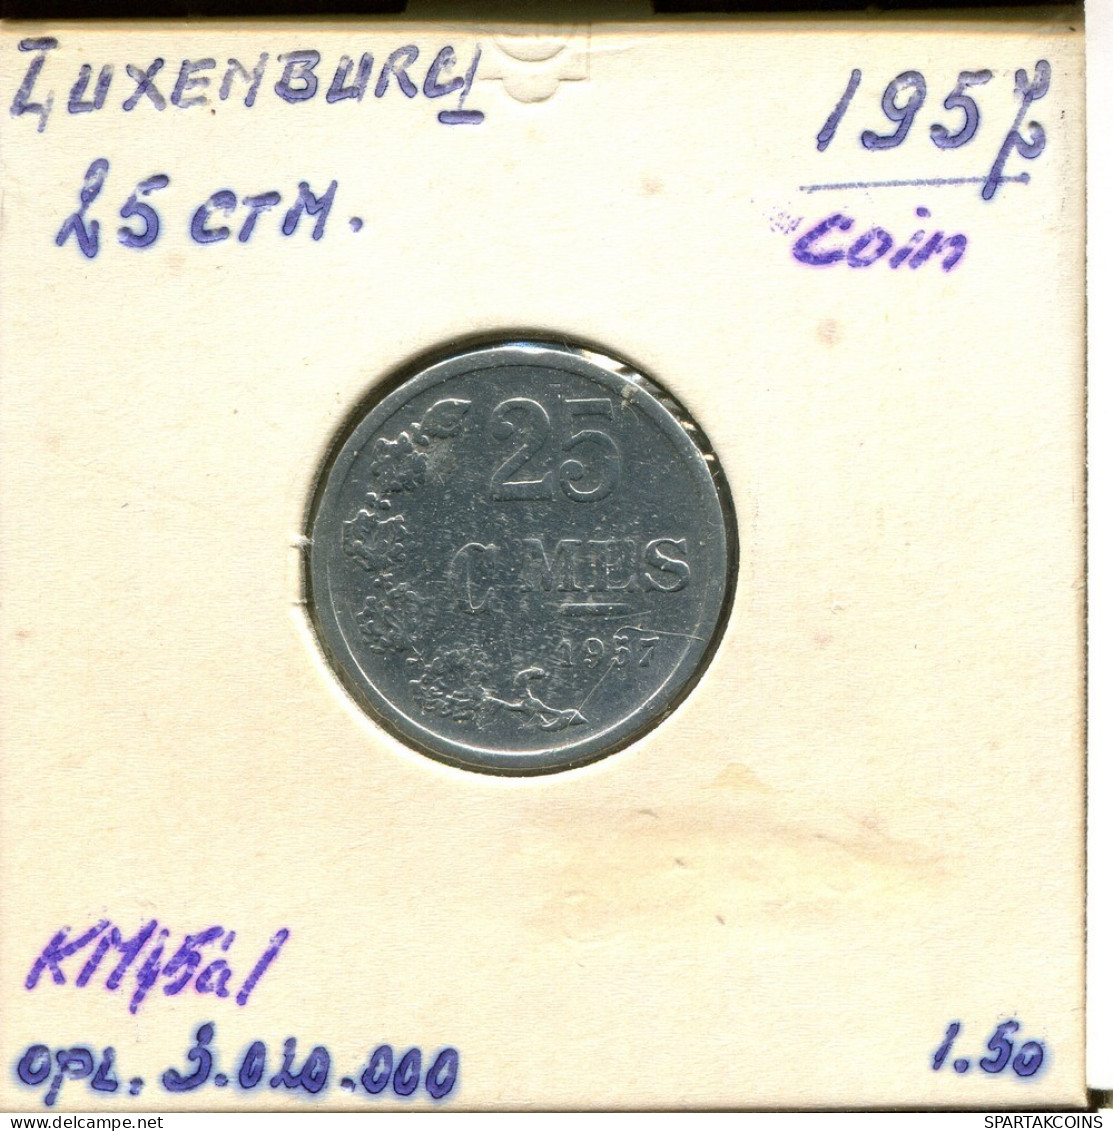 25 CENTIMES 1957 LUXEMBURG LUXEMBOURG Münze #AT192.D.A - Luxembourg